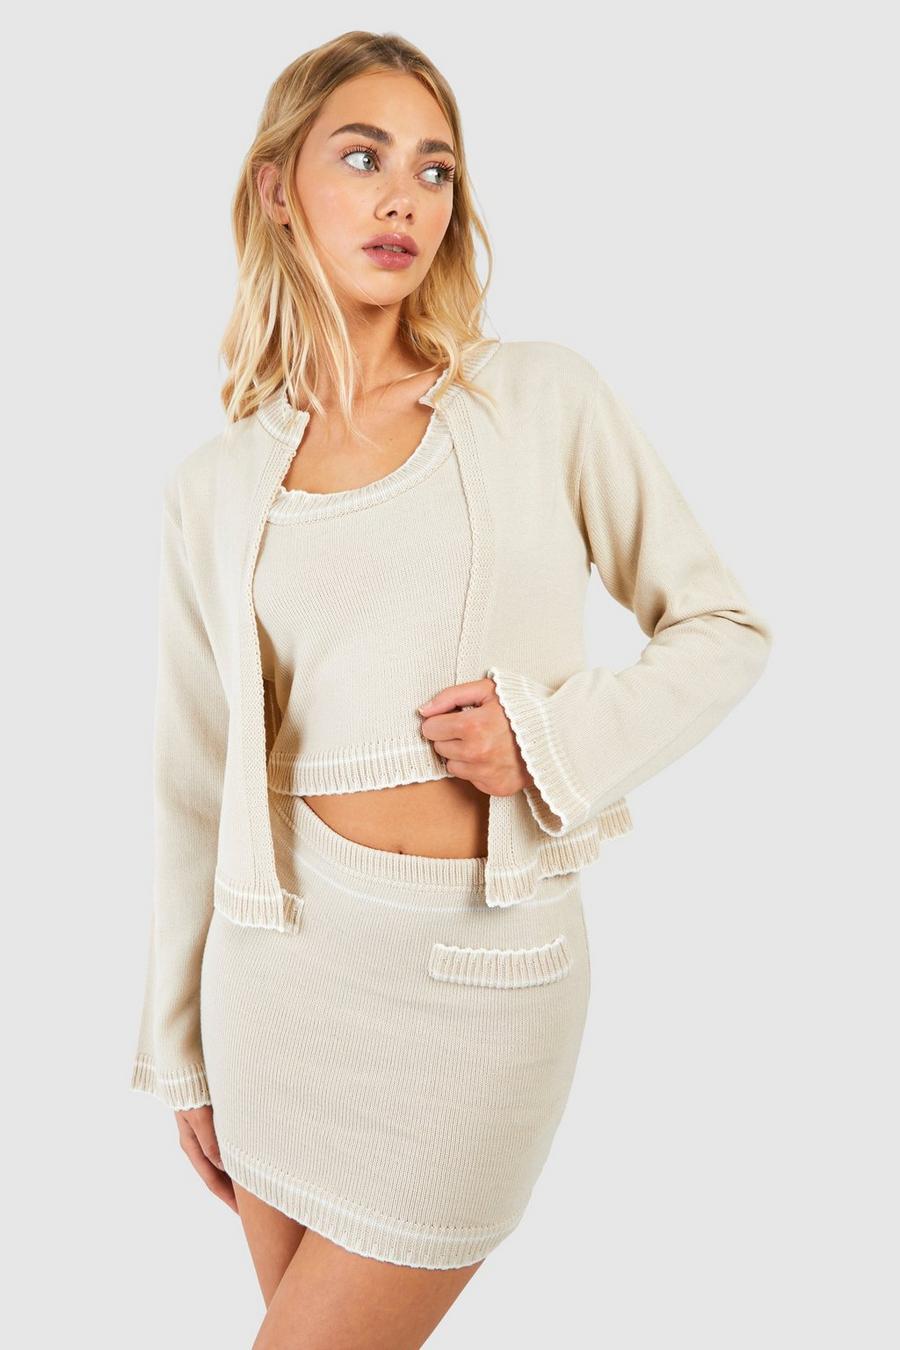 Contrast Stitch 3 Piece Knitted Cardigan, Crop Top And Mini Skirt Set, Stone